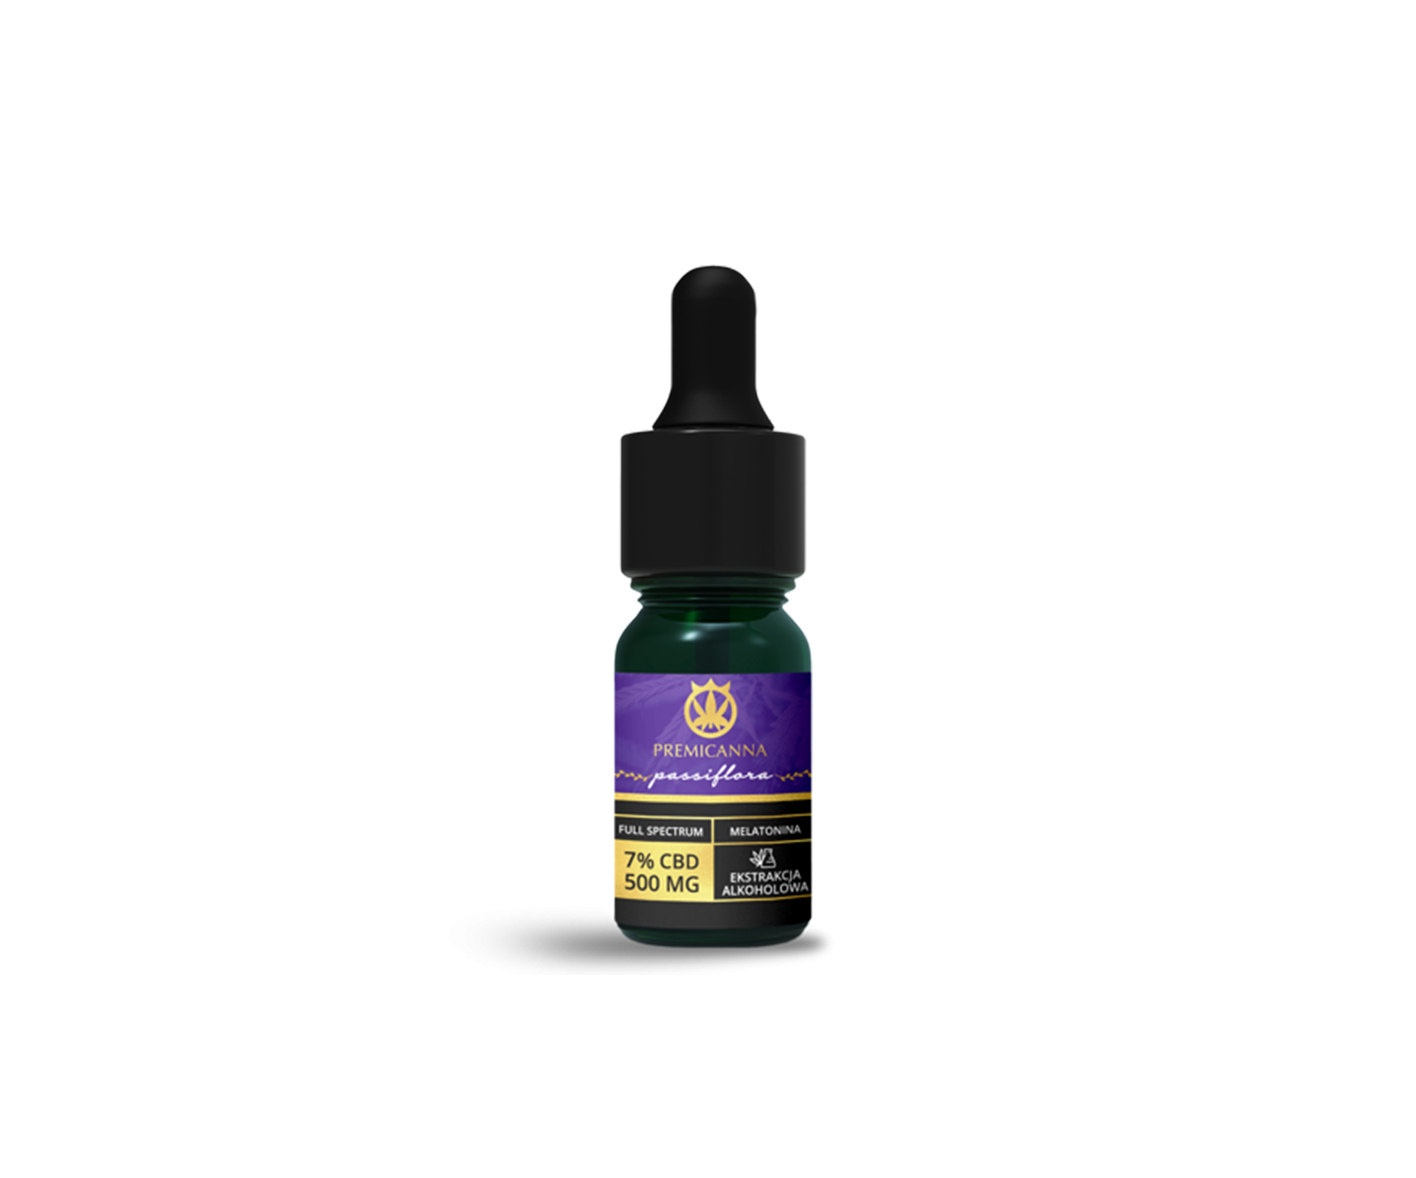 Premicanna, hemp oil with passionflower and melatonin